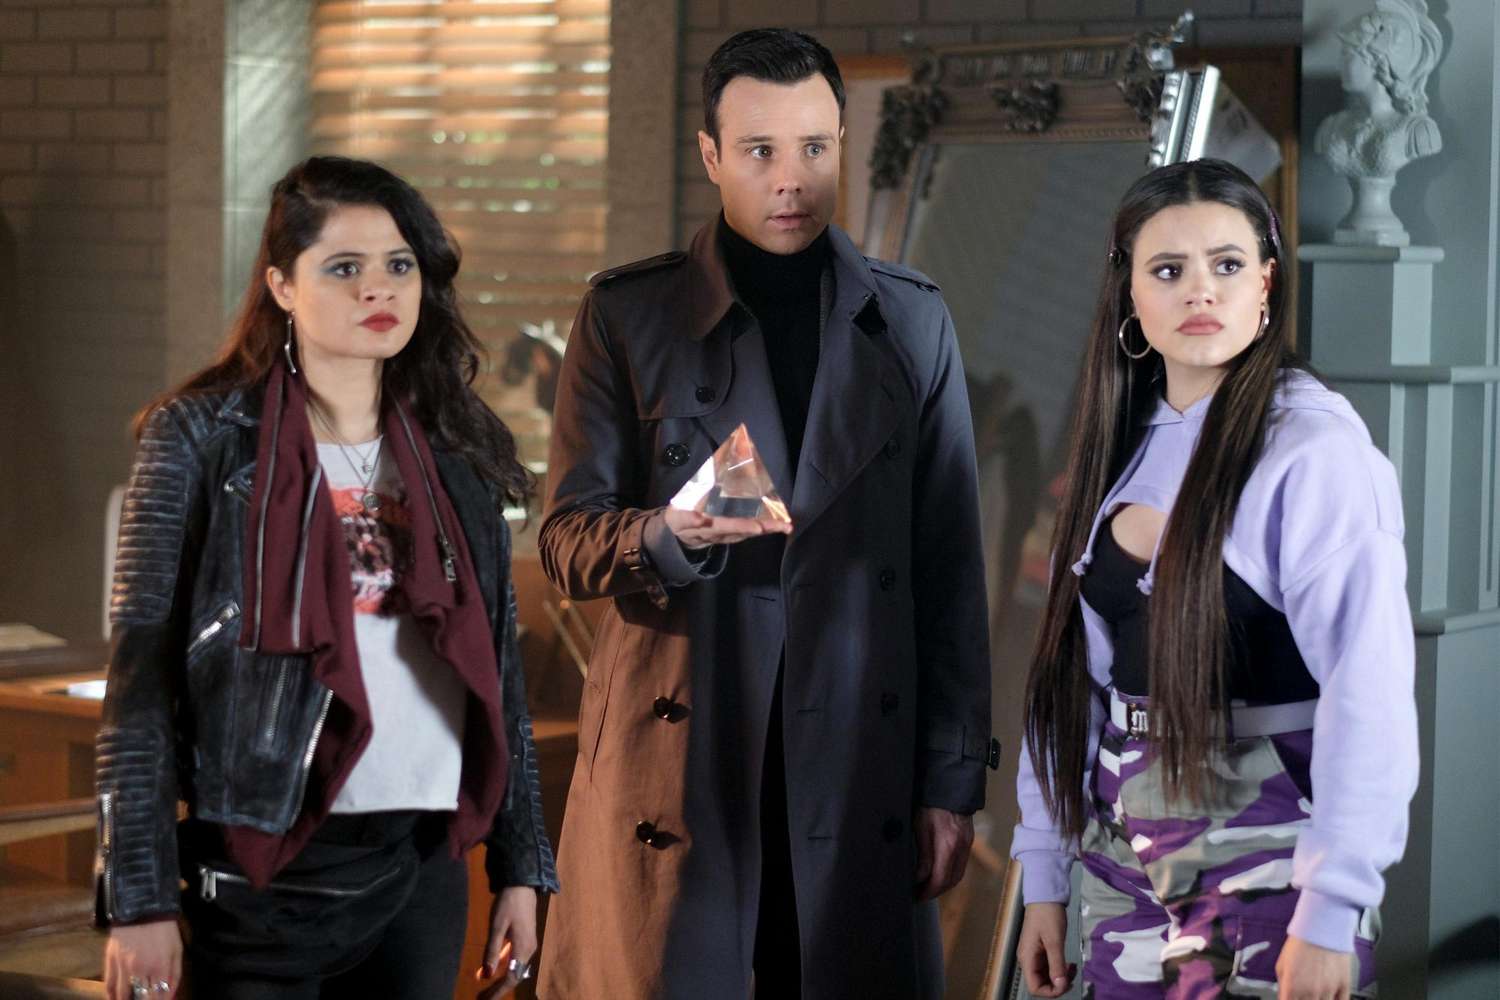 Charmed -- "The Source Awakens" -- Image Number: CMD122b_0300.jpg -- Pictured (L-R): Melonie Diaz as Mel, Rupert Evans as Harry and Sarah Jeffery as Maggie -- Photo: Robert Falconer/The CW -- &Atilde;&Acirc;&copy; 2019 The CW Network, LLC. All rights reserved.